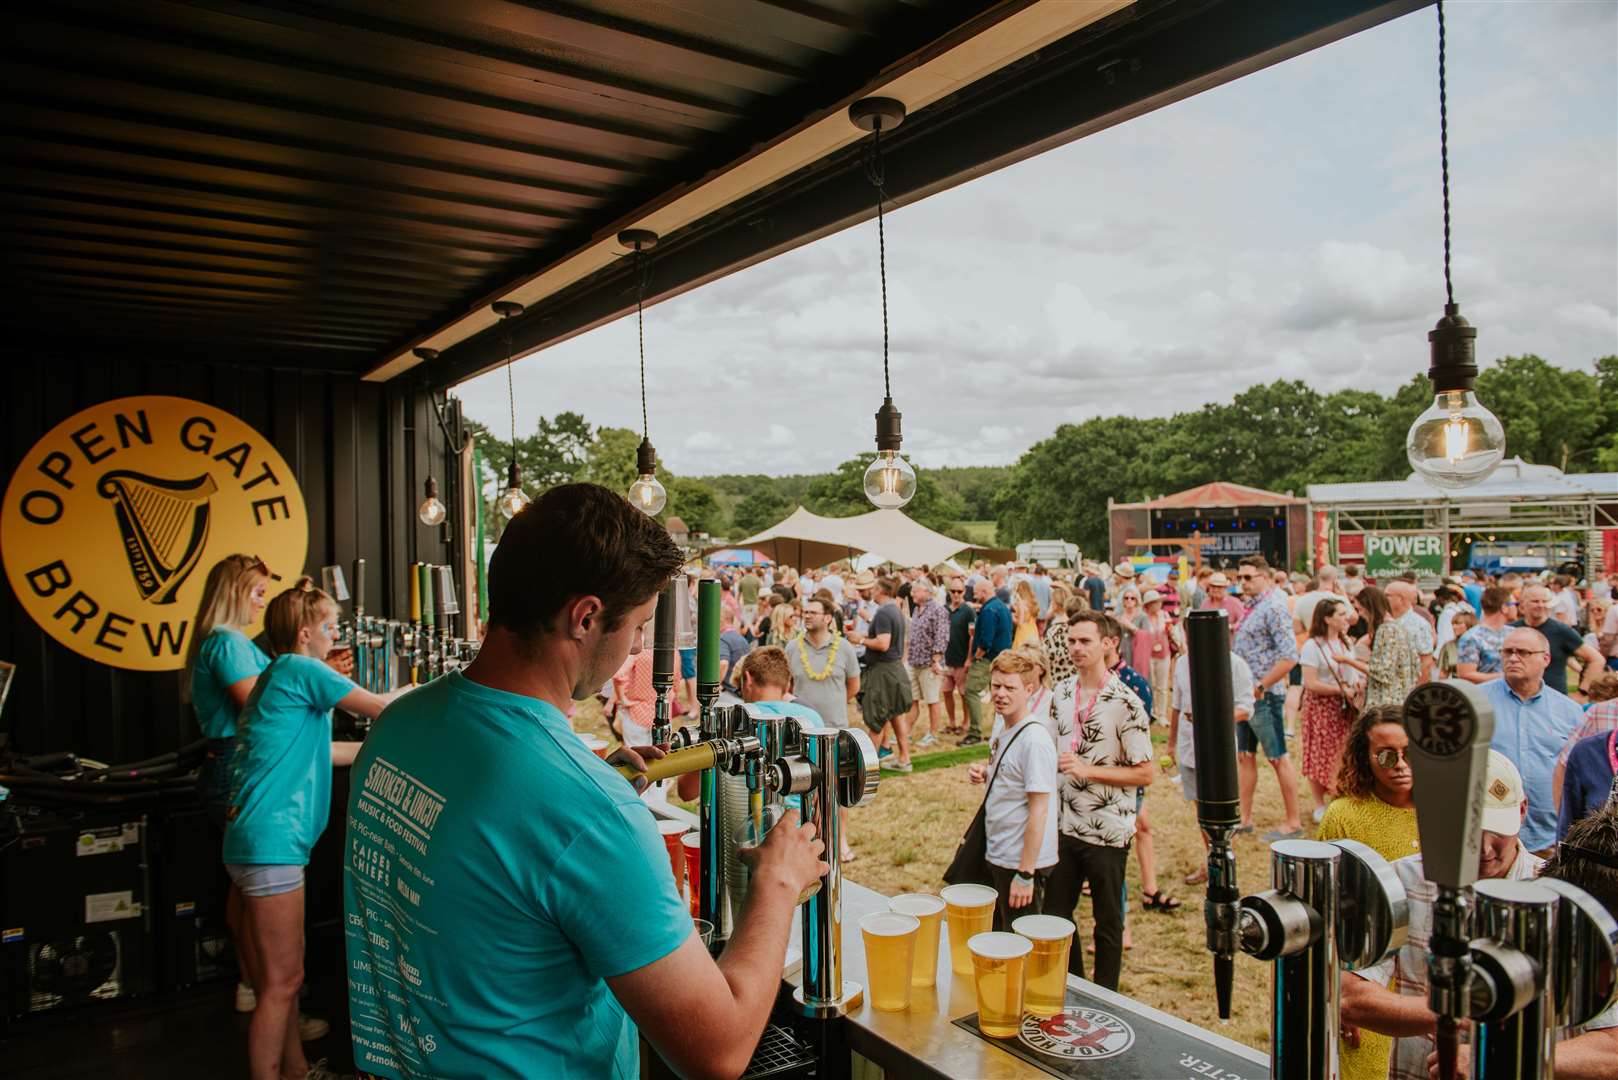 From Shepherd Neame beers to alcohol free tipples, there will be plenty of drinks on offer. Picture: Jennifer McCord